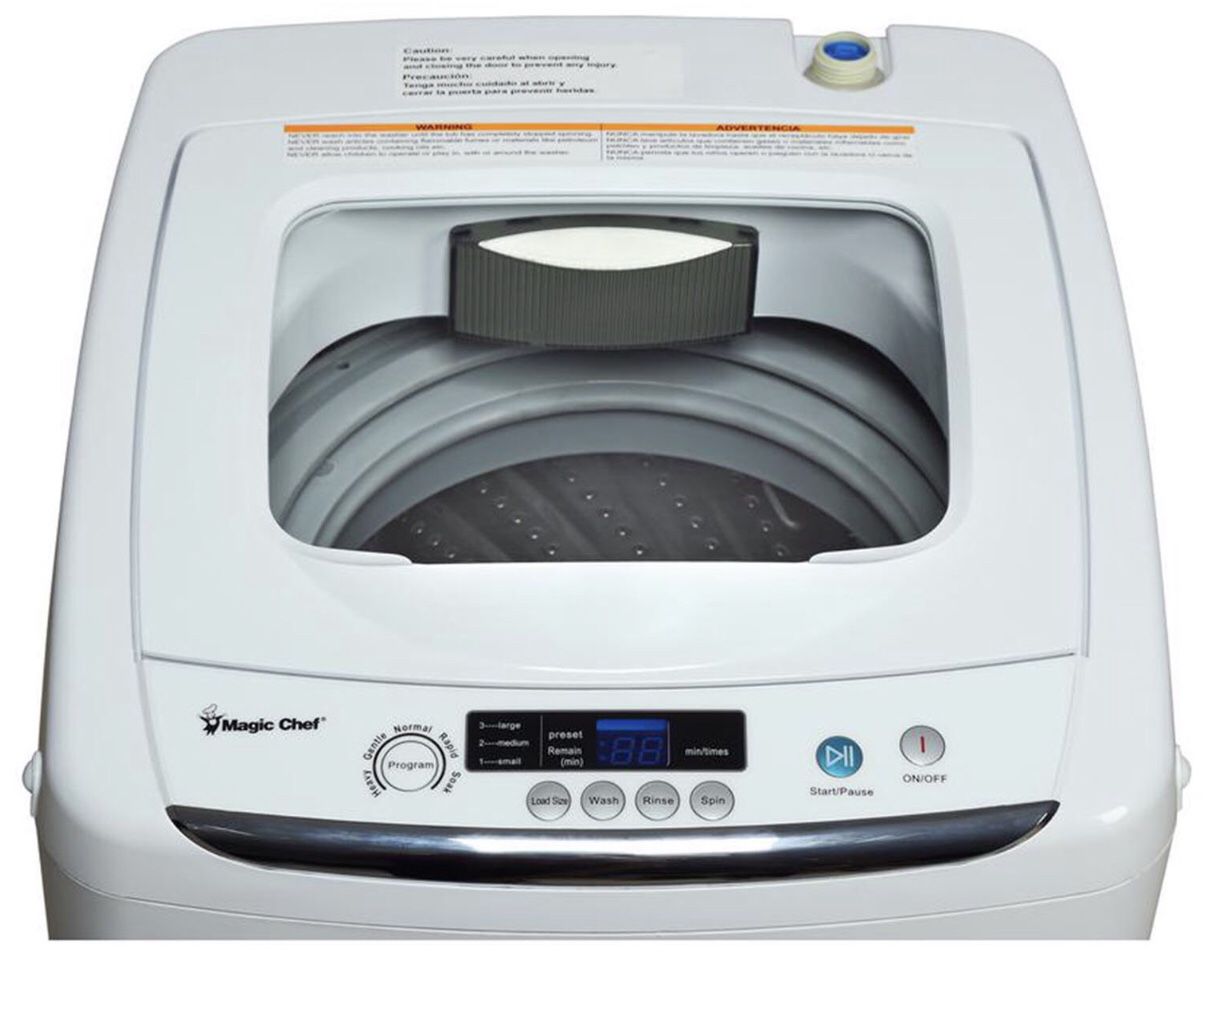 Magic Chef 0.9 cu. ft. Compact Top load Washer, White